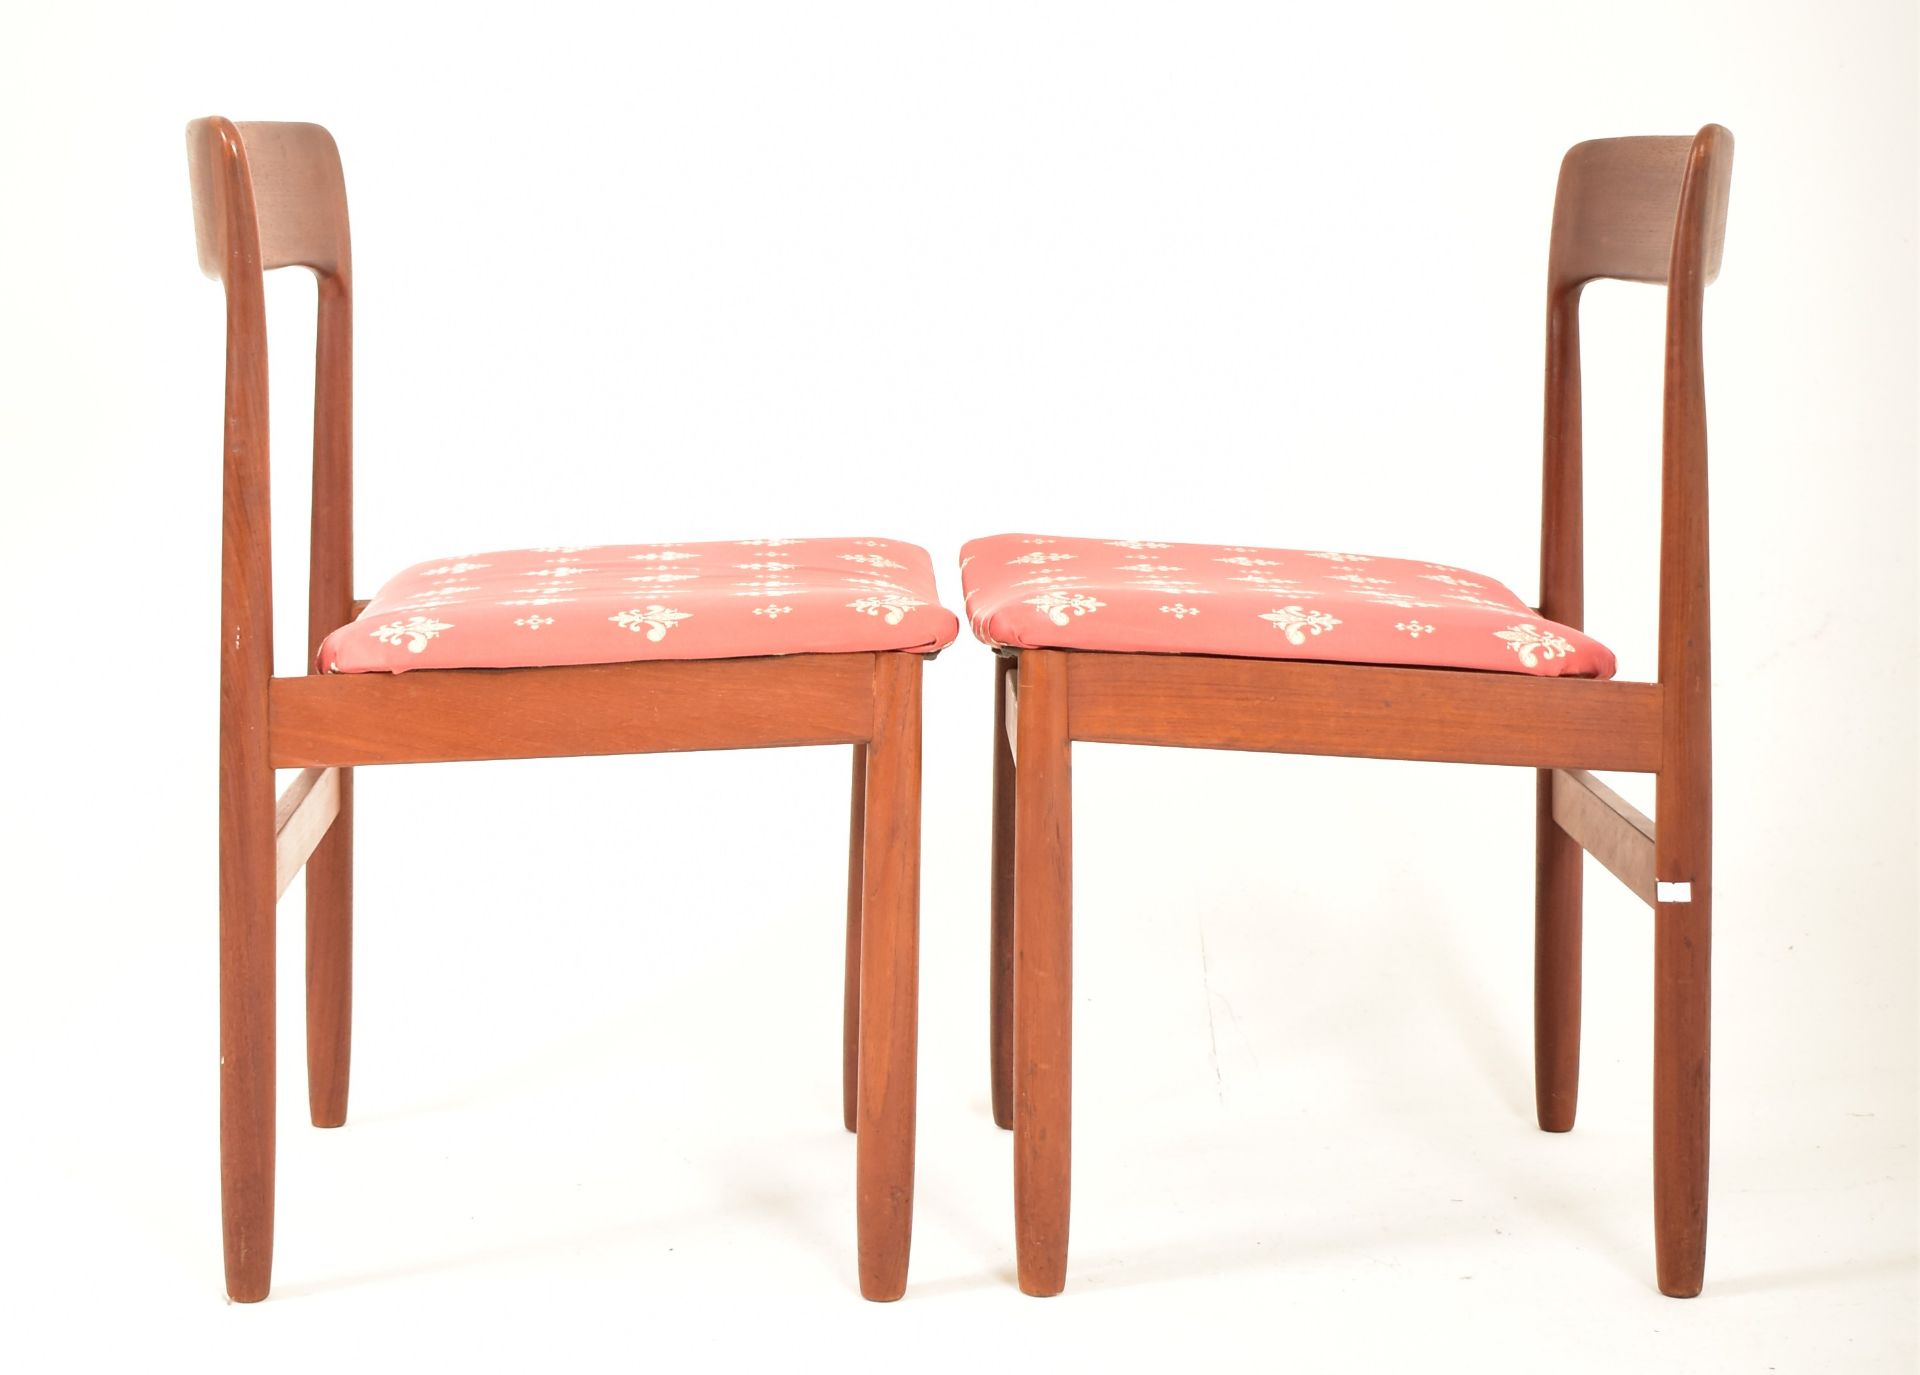 YOUNGERS - MID CENTURY 1960S TEAK DINING TABLE AND CHAIRS - Image 7 of 9